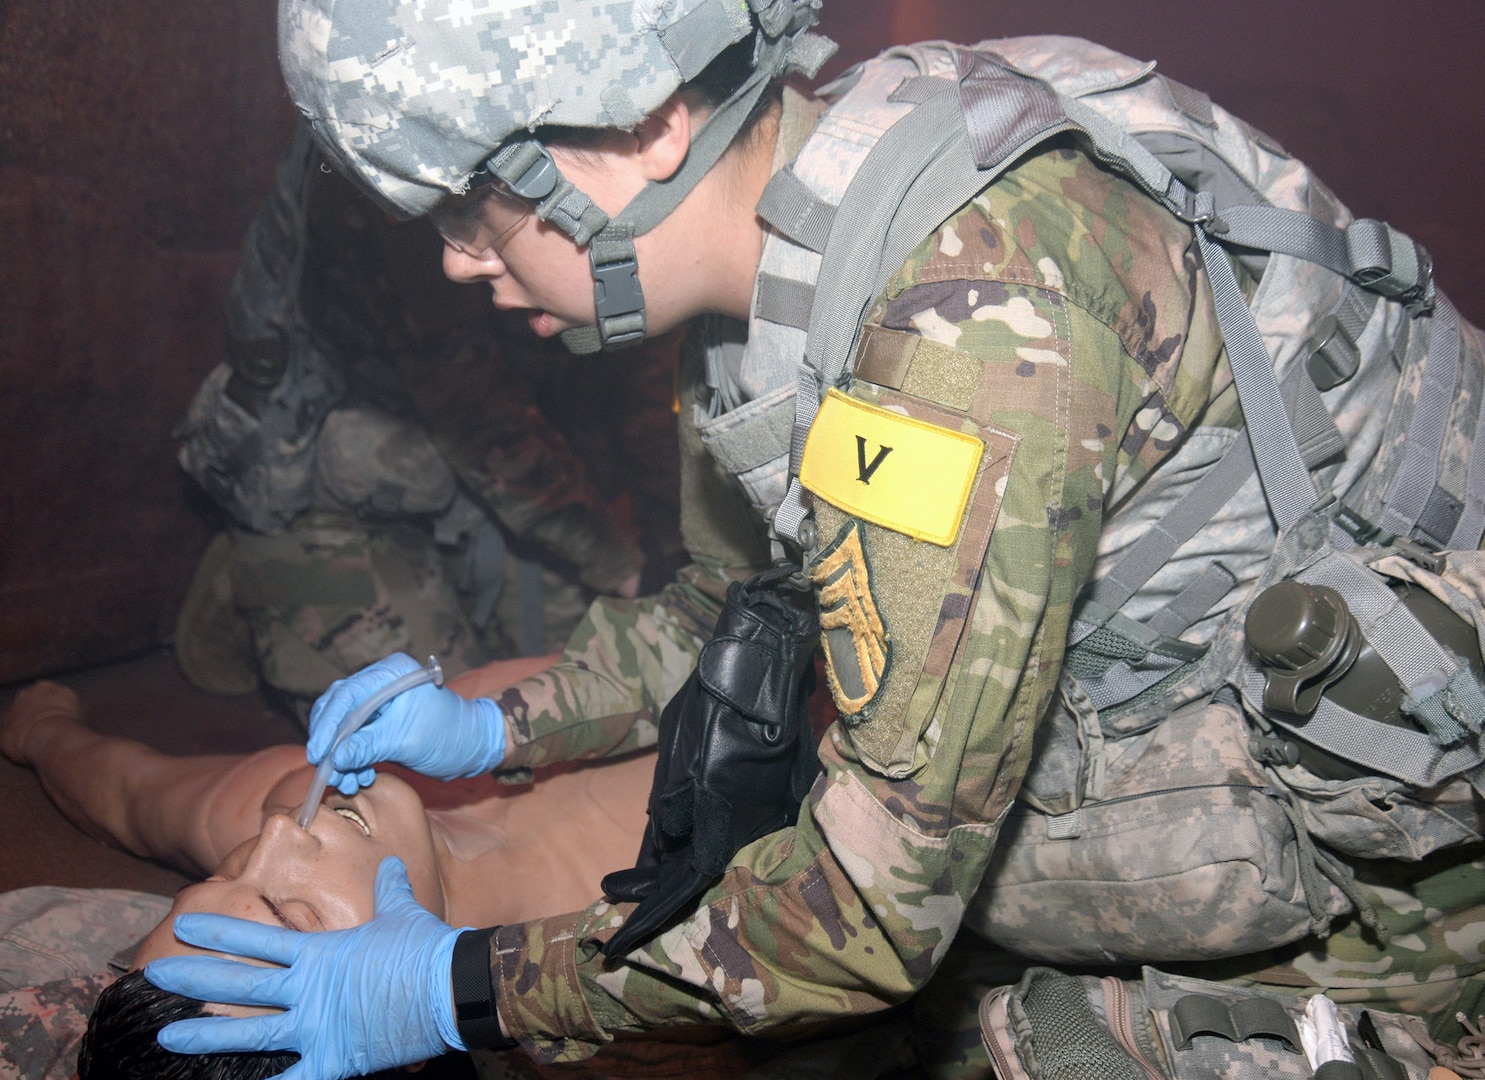 Pvt. Sadie Gowan of the 232nd Medical Battalion works to intubate a mannequin at the Combat Trauma Patient Simulation Lab, located at the Medical Education Training Campus at Joint Base San Antonio-Fort Sam Houston.